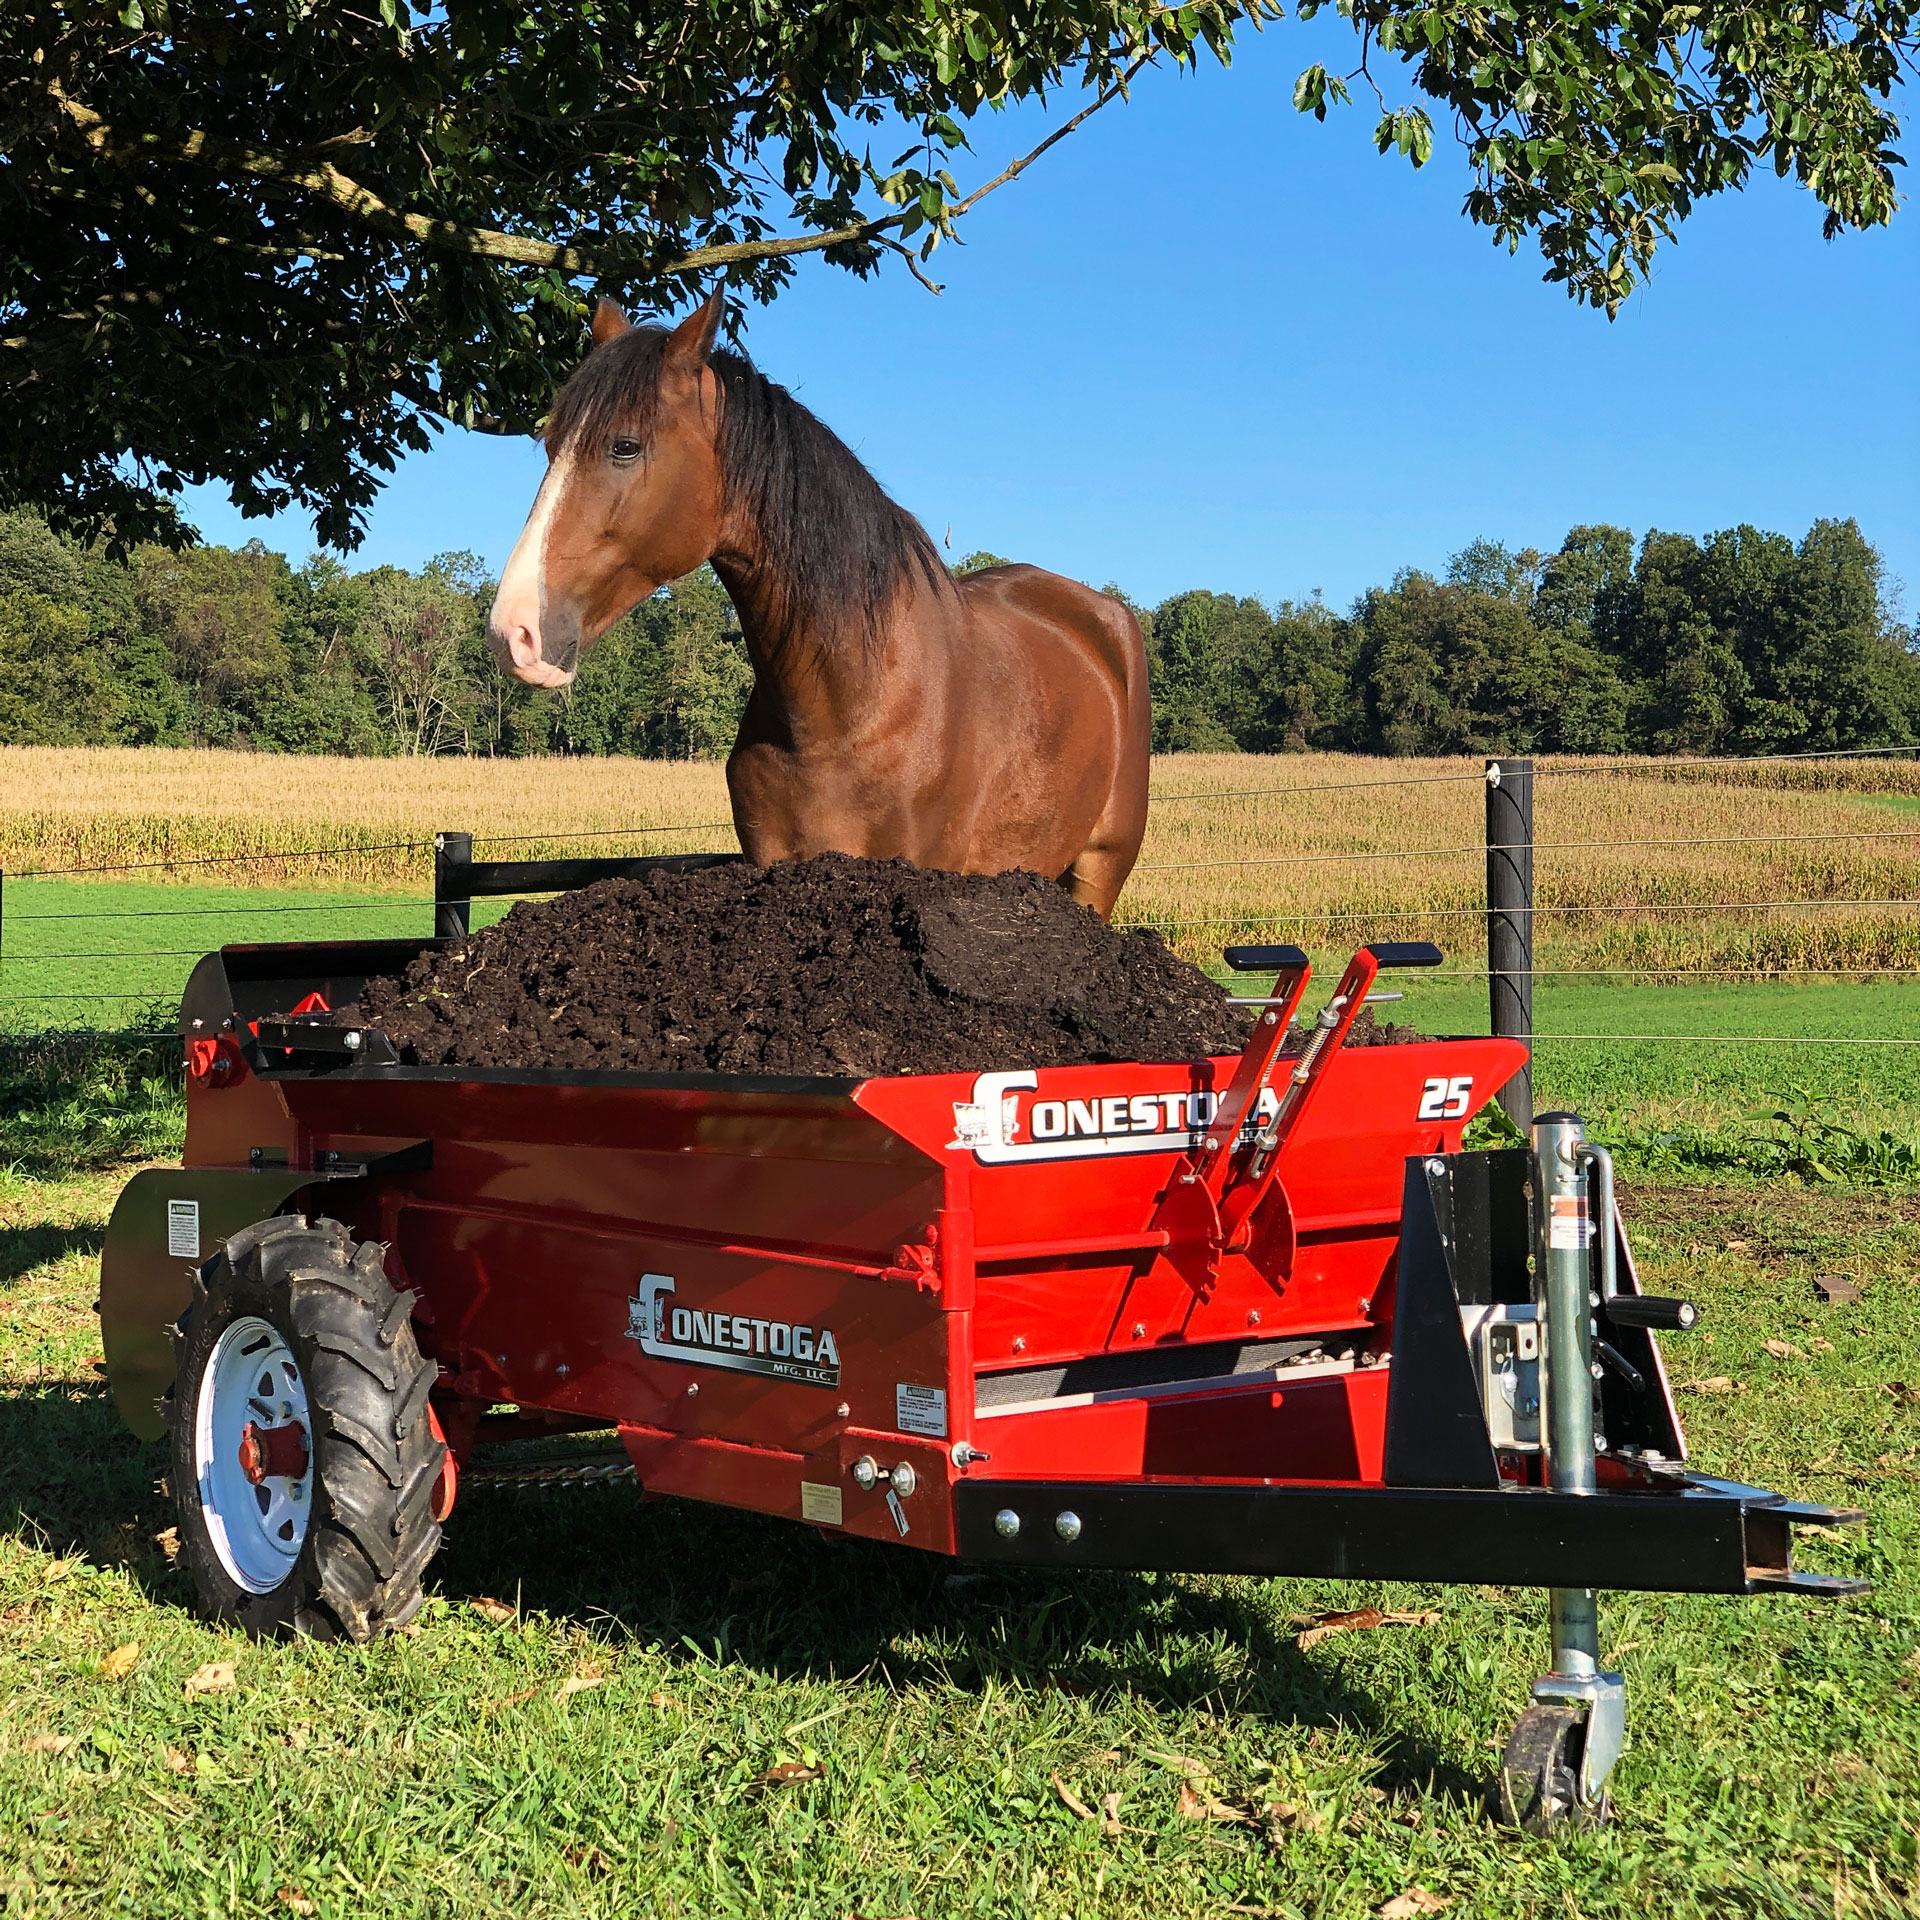 7 questions to ask before you buy a manure spreader conestoga manure spreaders 2